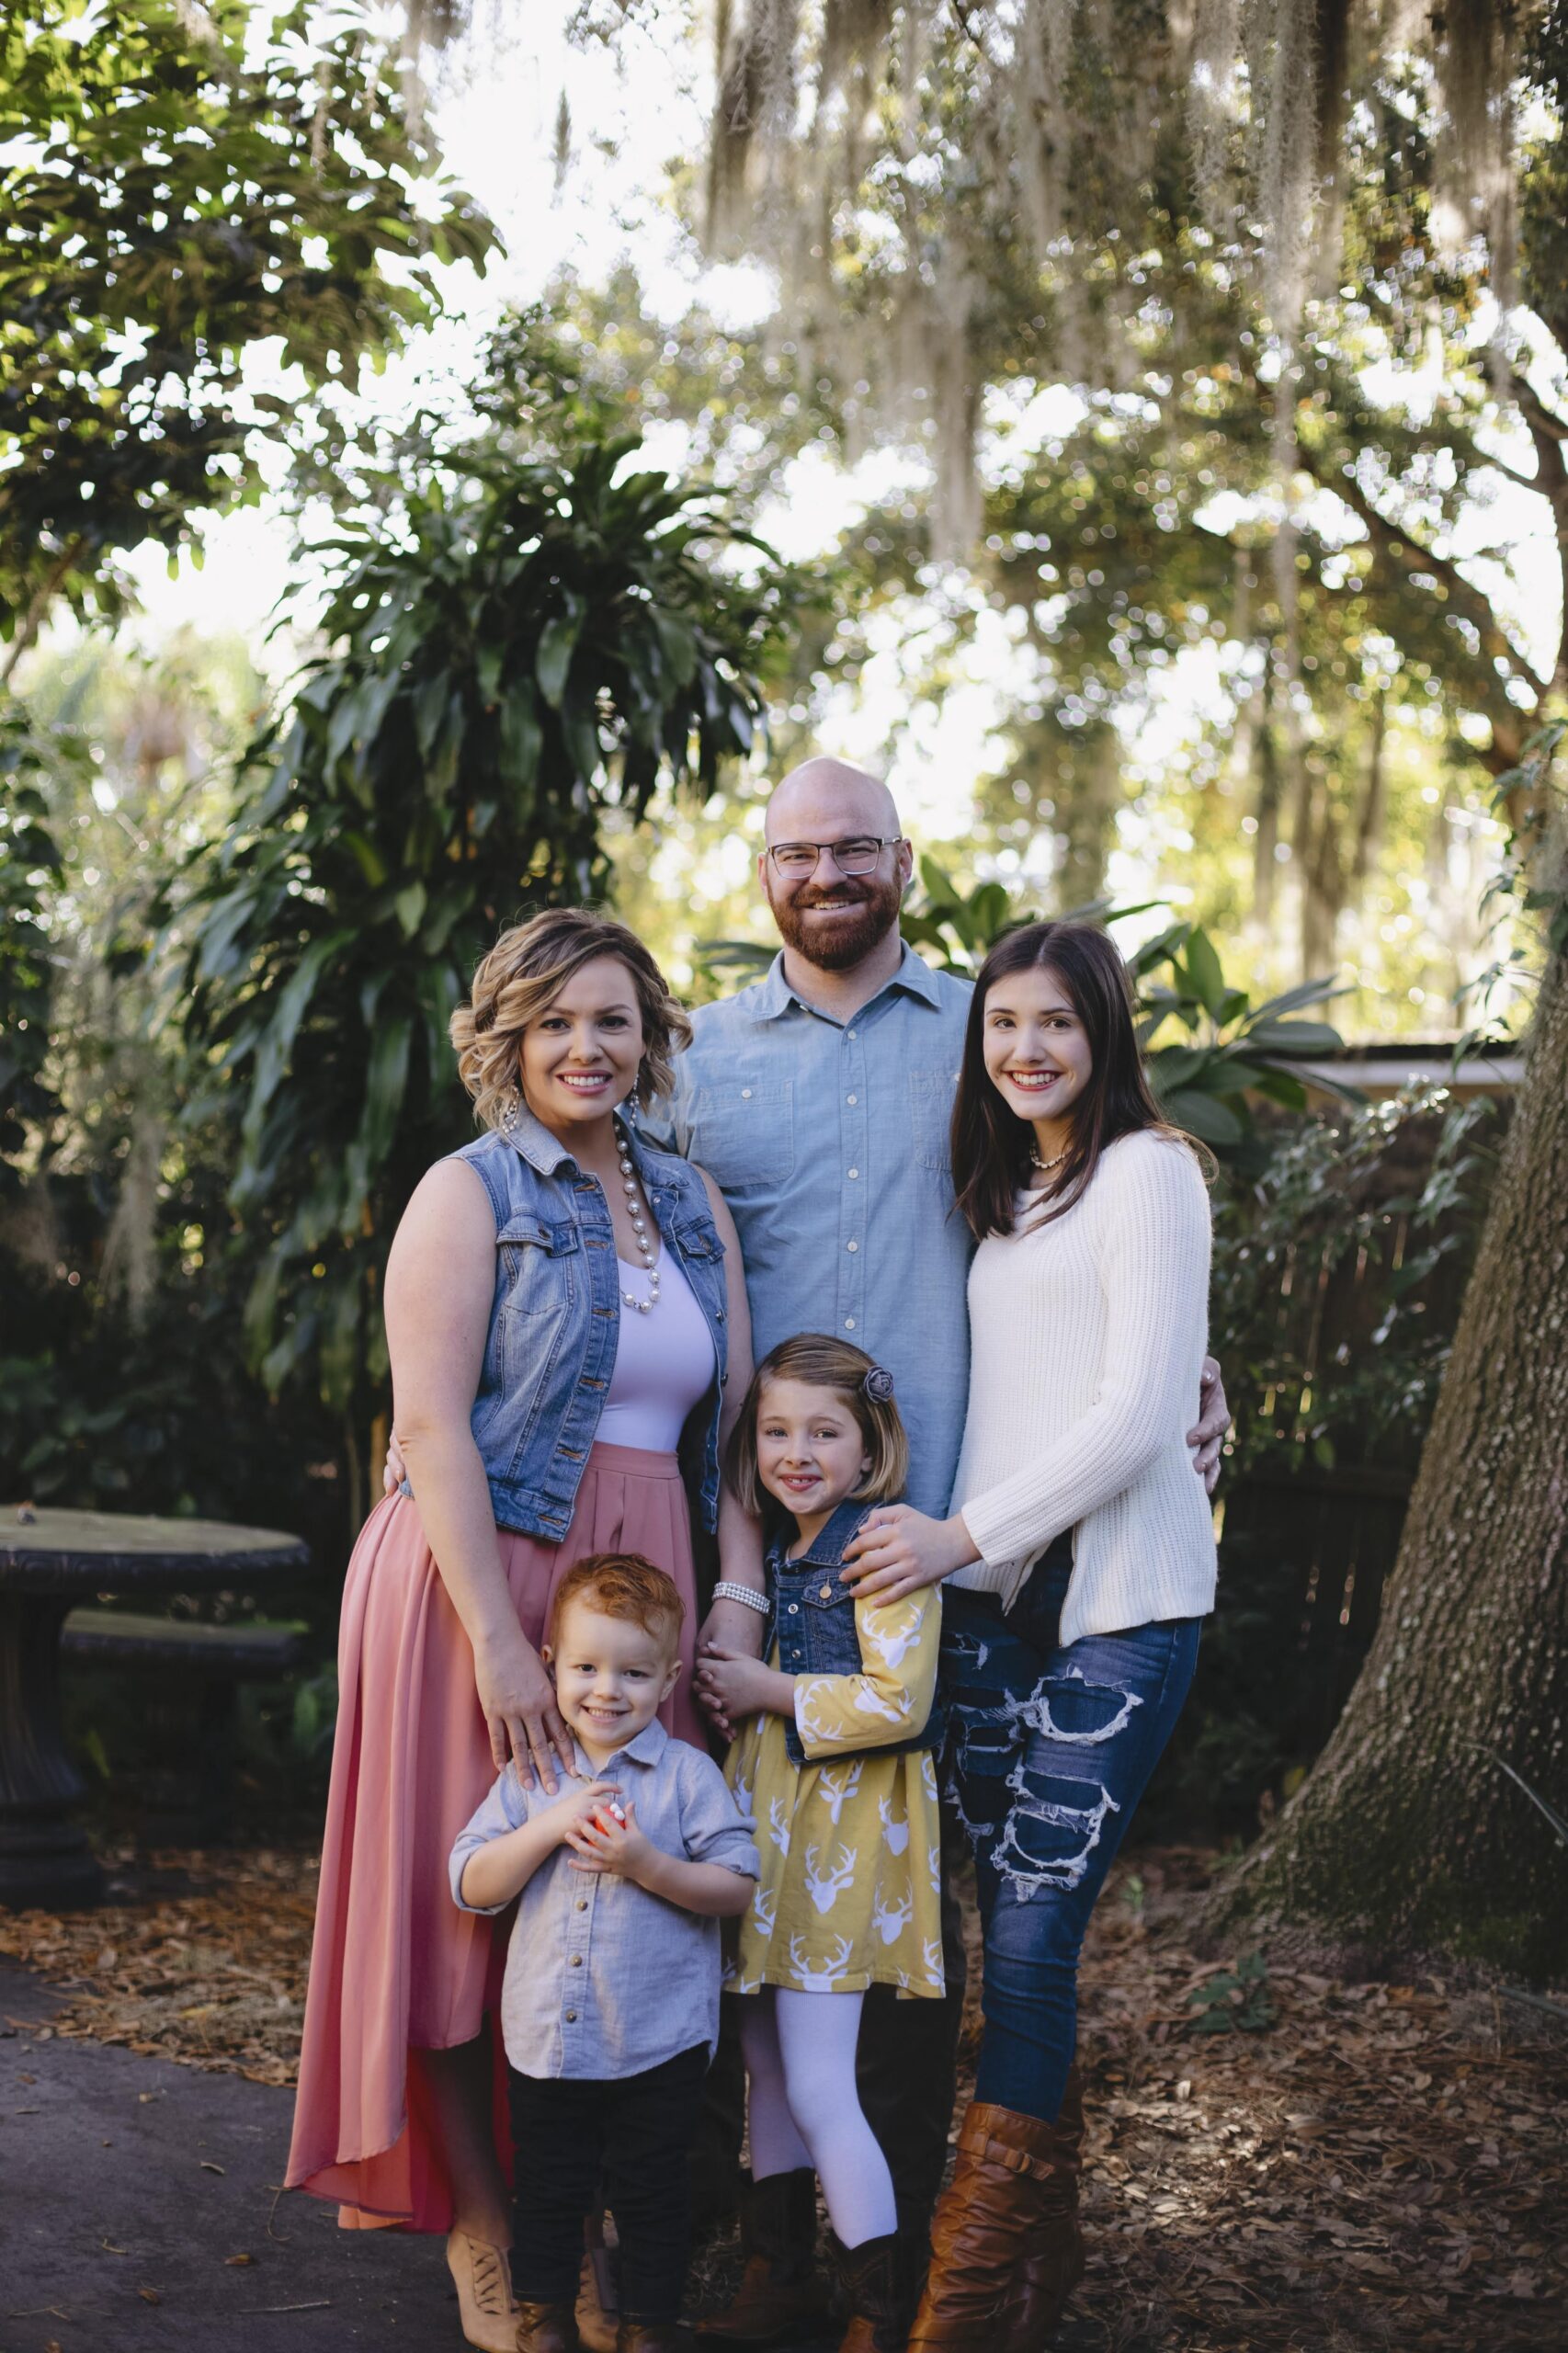 family photo (taken outside) of 5 family members. a blonde & brown curly haired mom, a bald dad with a beard, a brunette teenage girl, a blonde young girl and a redheaded toddler boy.